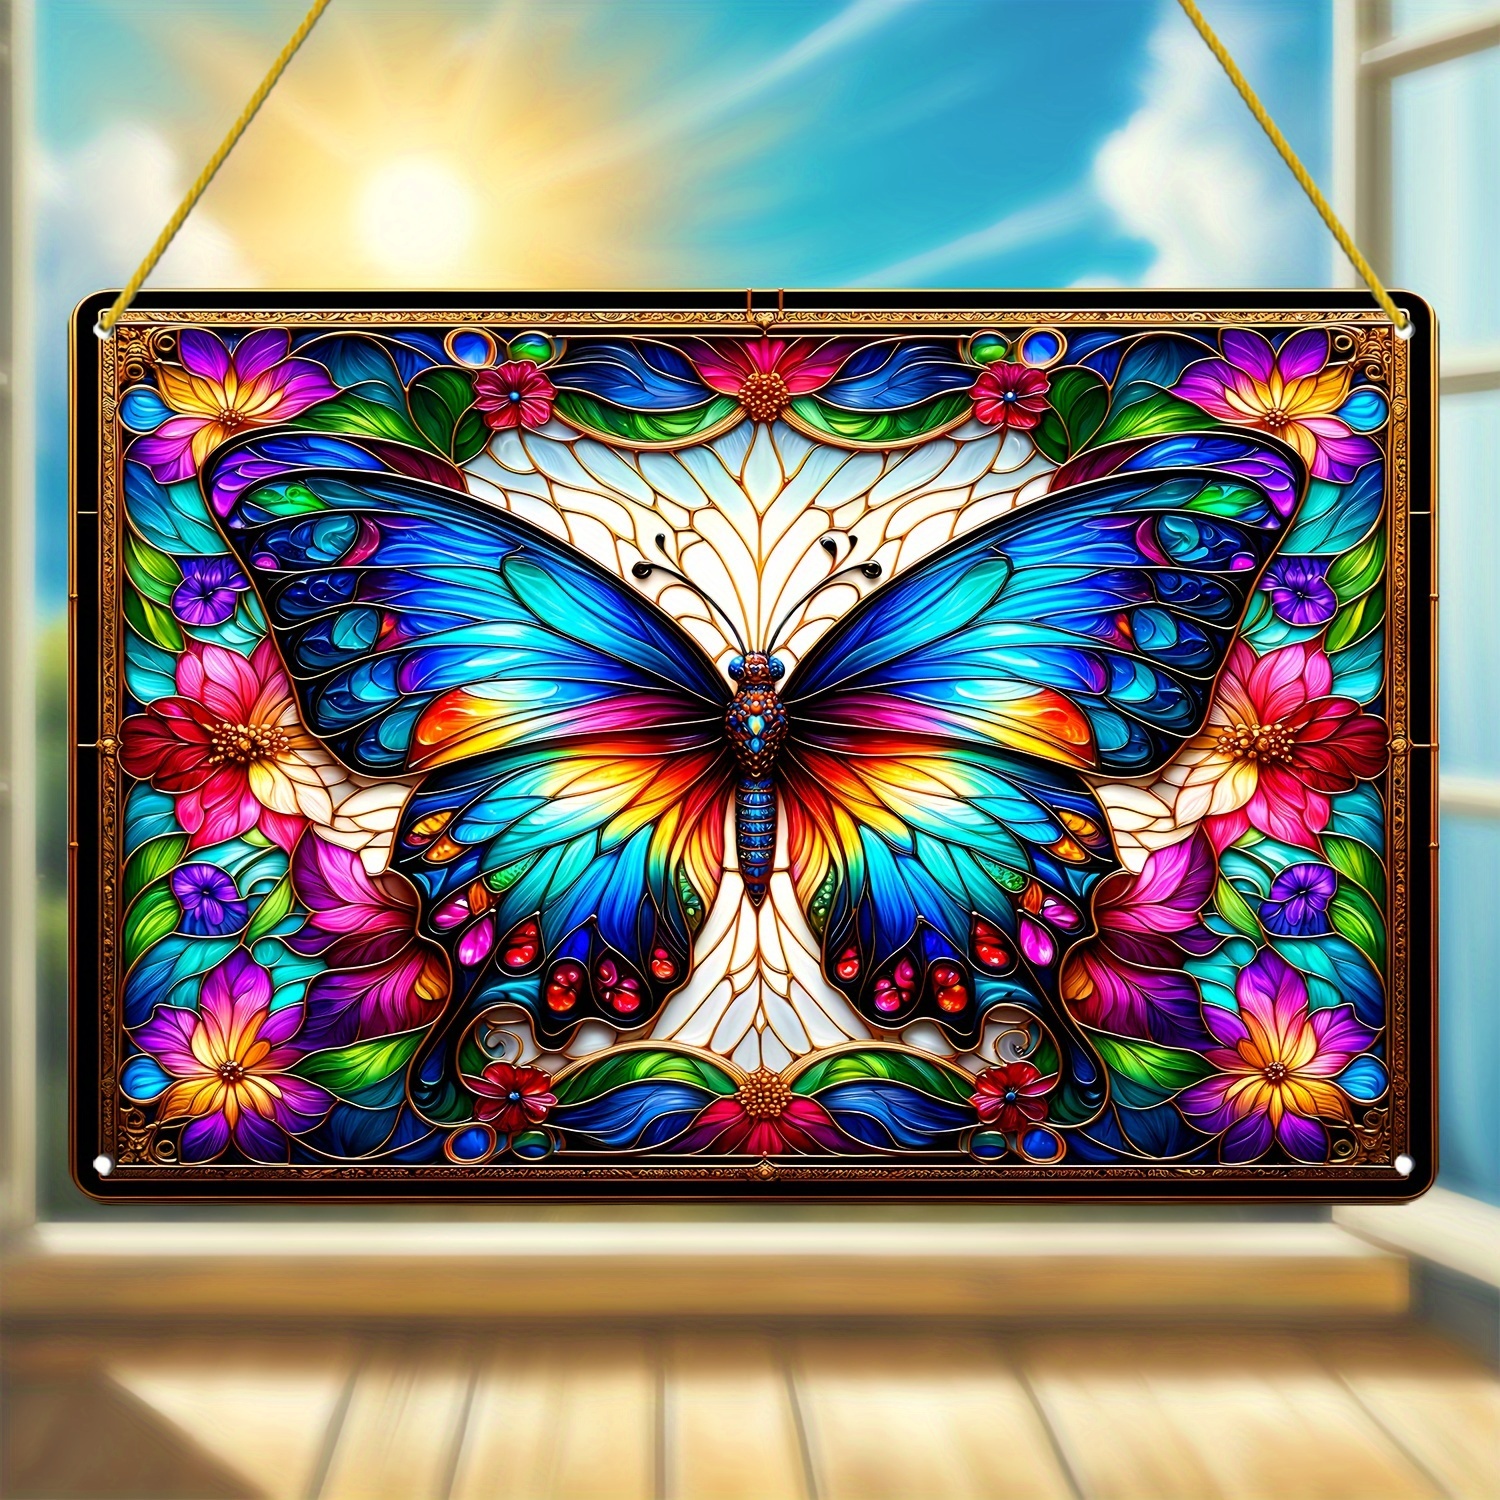 

Butterfly Sun Catcher For Windows - Acrylic Window Art, 12x8 Inches, Perfect For Room, Scene, Bar Decor & Summer Festivities - Ideal Housewarming Gift For Friends And Family, Whimsical Present - 1pc